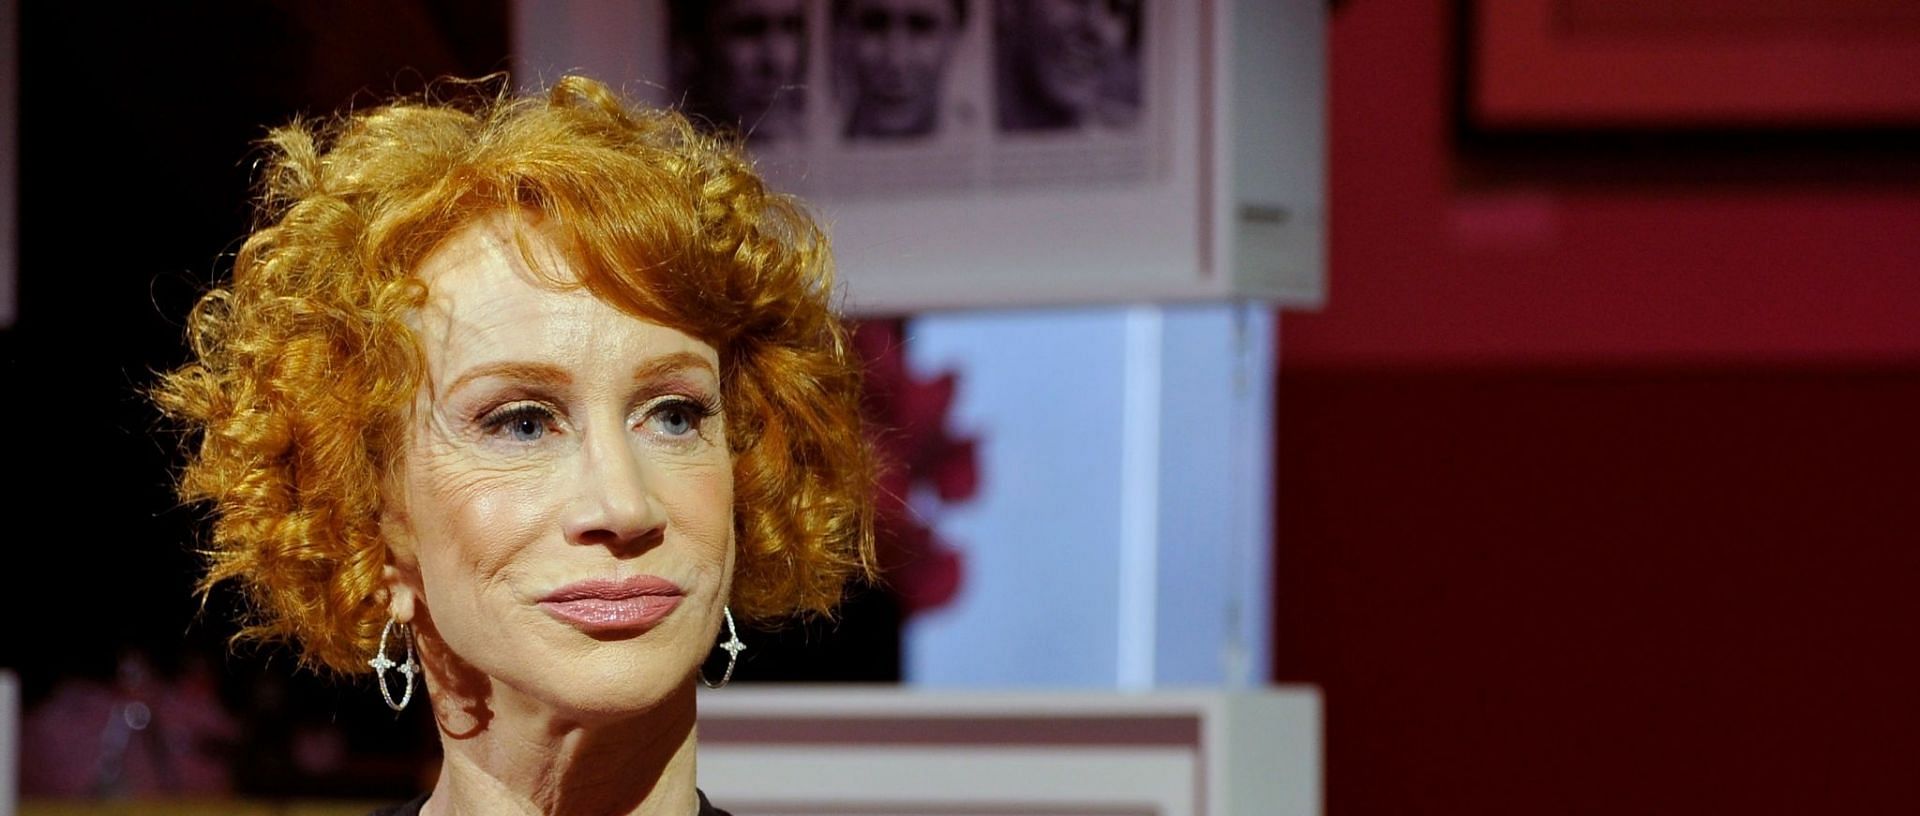 Kathy Griffin allegedly received death threats following her Trump photoshoot scandal (Image via John Sciulli/Getty Images)